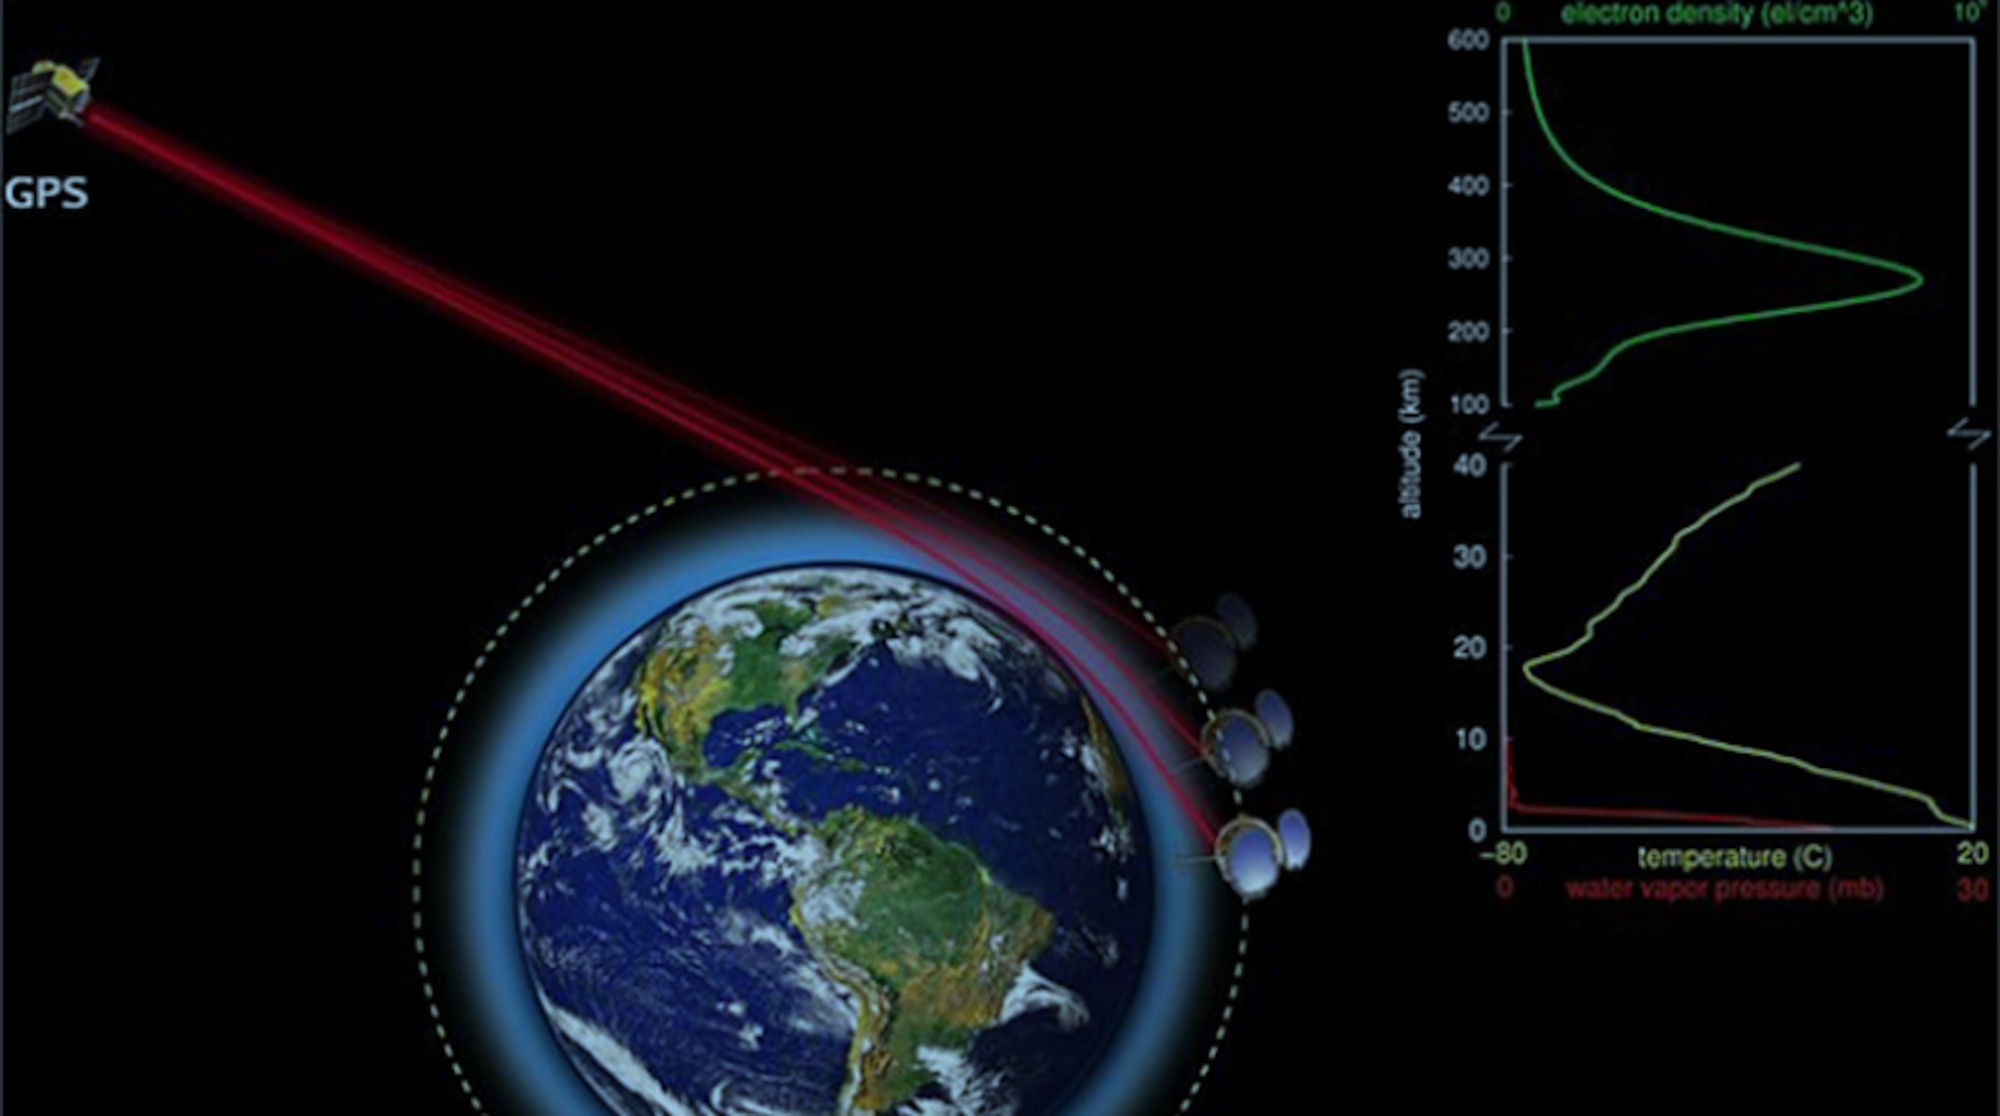 Weather scientists generate certain types of weather data by comparing how radio waves from the Global Navigation Satellite System react to the atmosphere, weather and climate. An Air Force Other Transaction Agreement will ask a third-party analyst to study the utility of data generated by GPS signal shifts in the atmosphere, called a radio occulation measurement. (U.S. Air Force graphic)